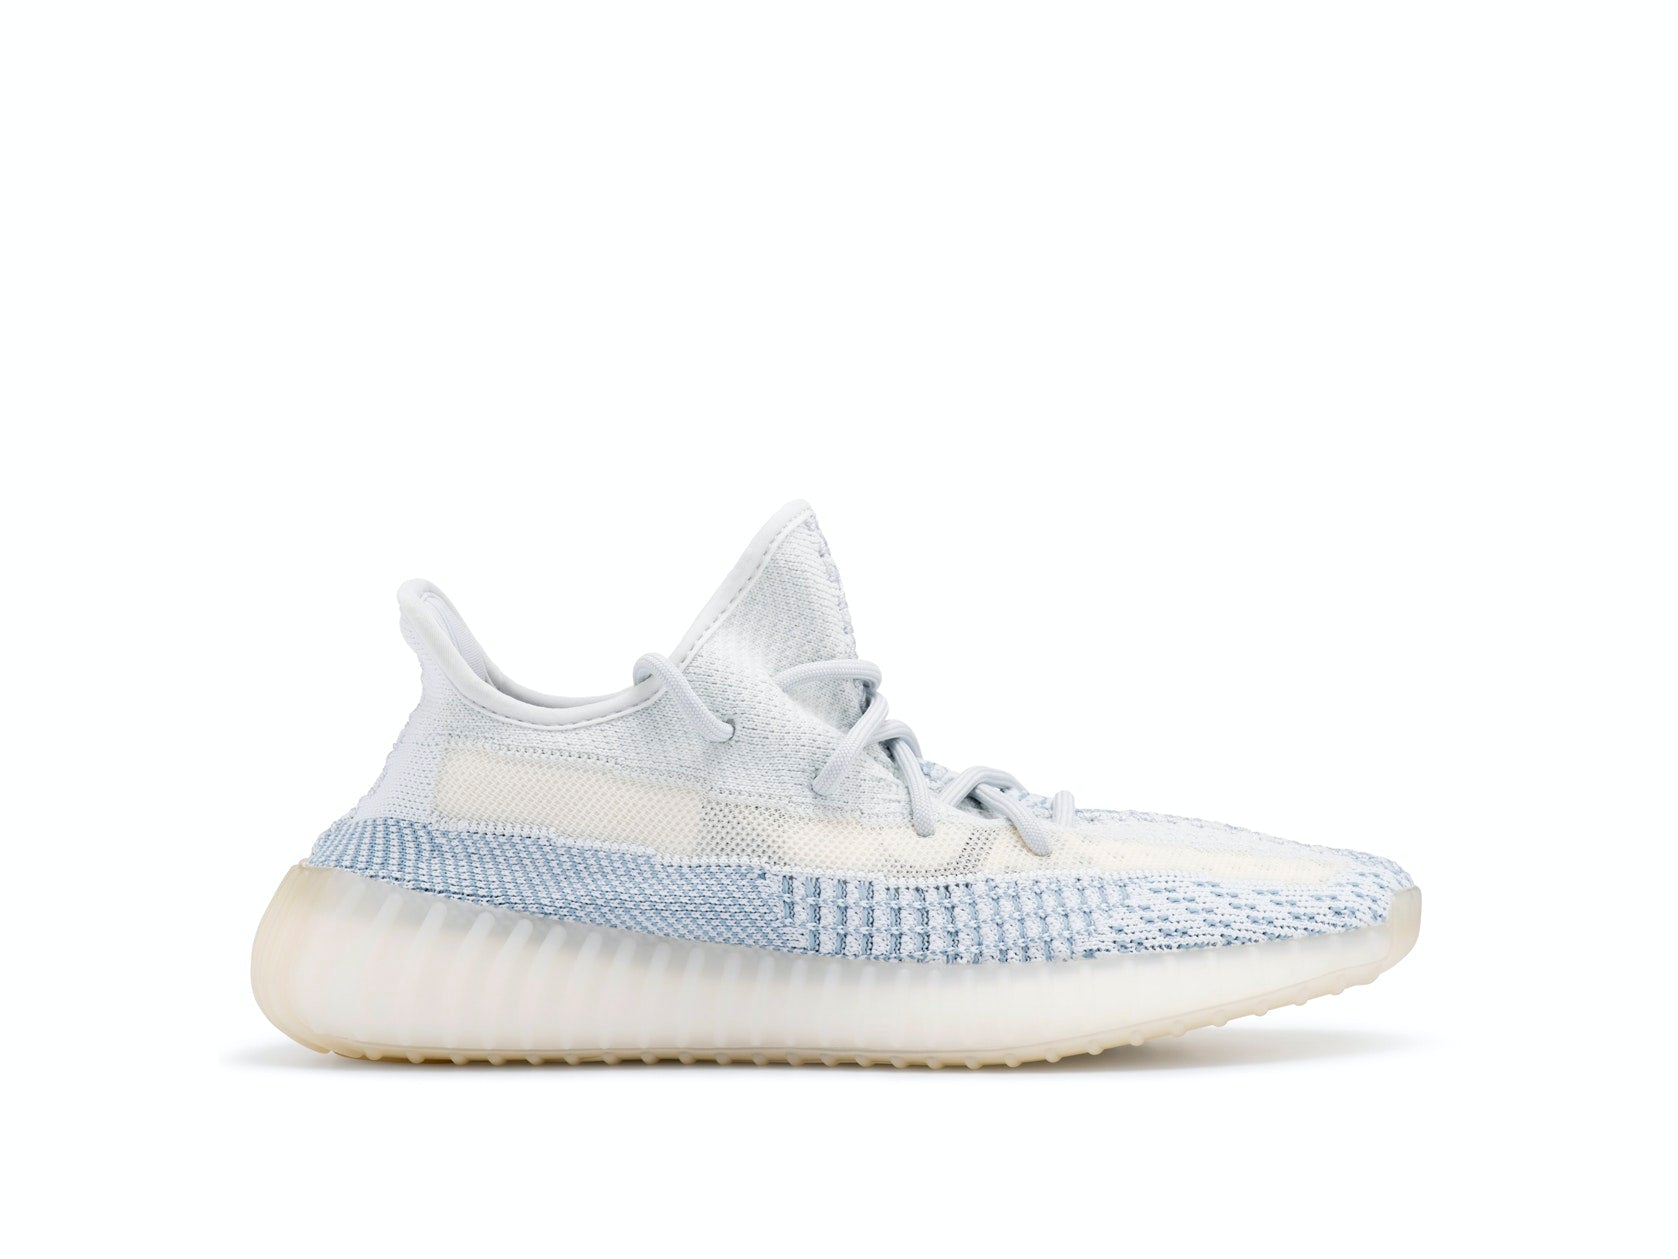 yeezy boost 350 v2 double white